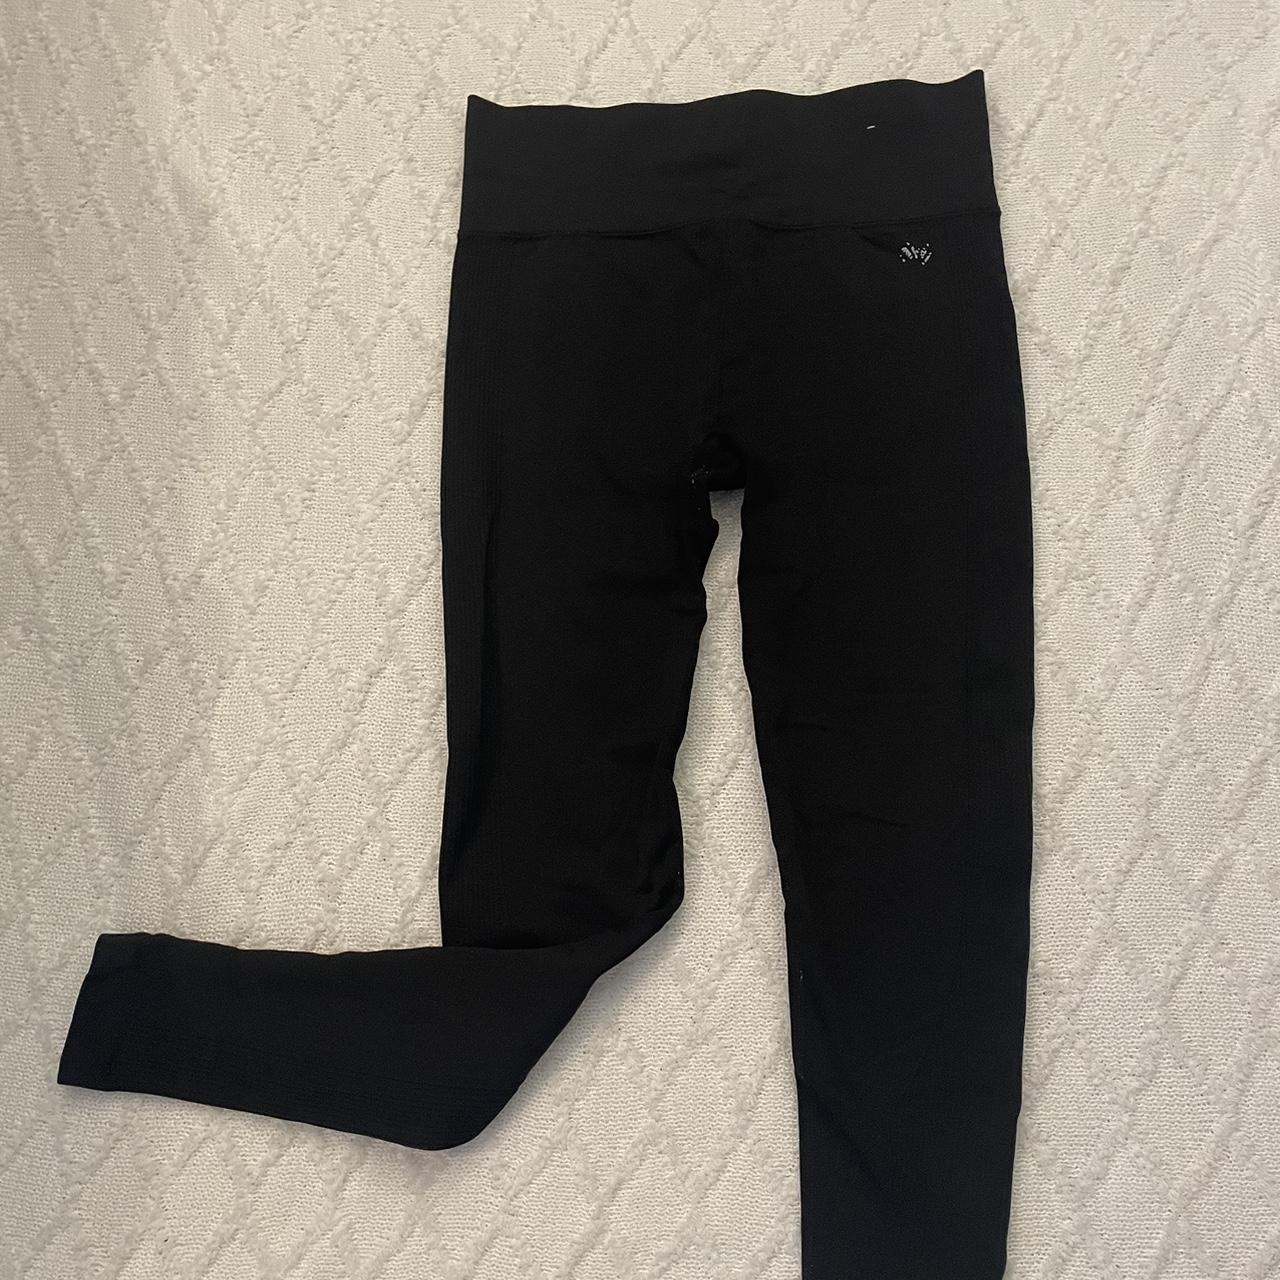 Forever 21 stylish high rise black leggings with red - Depop